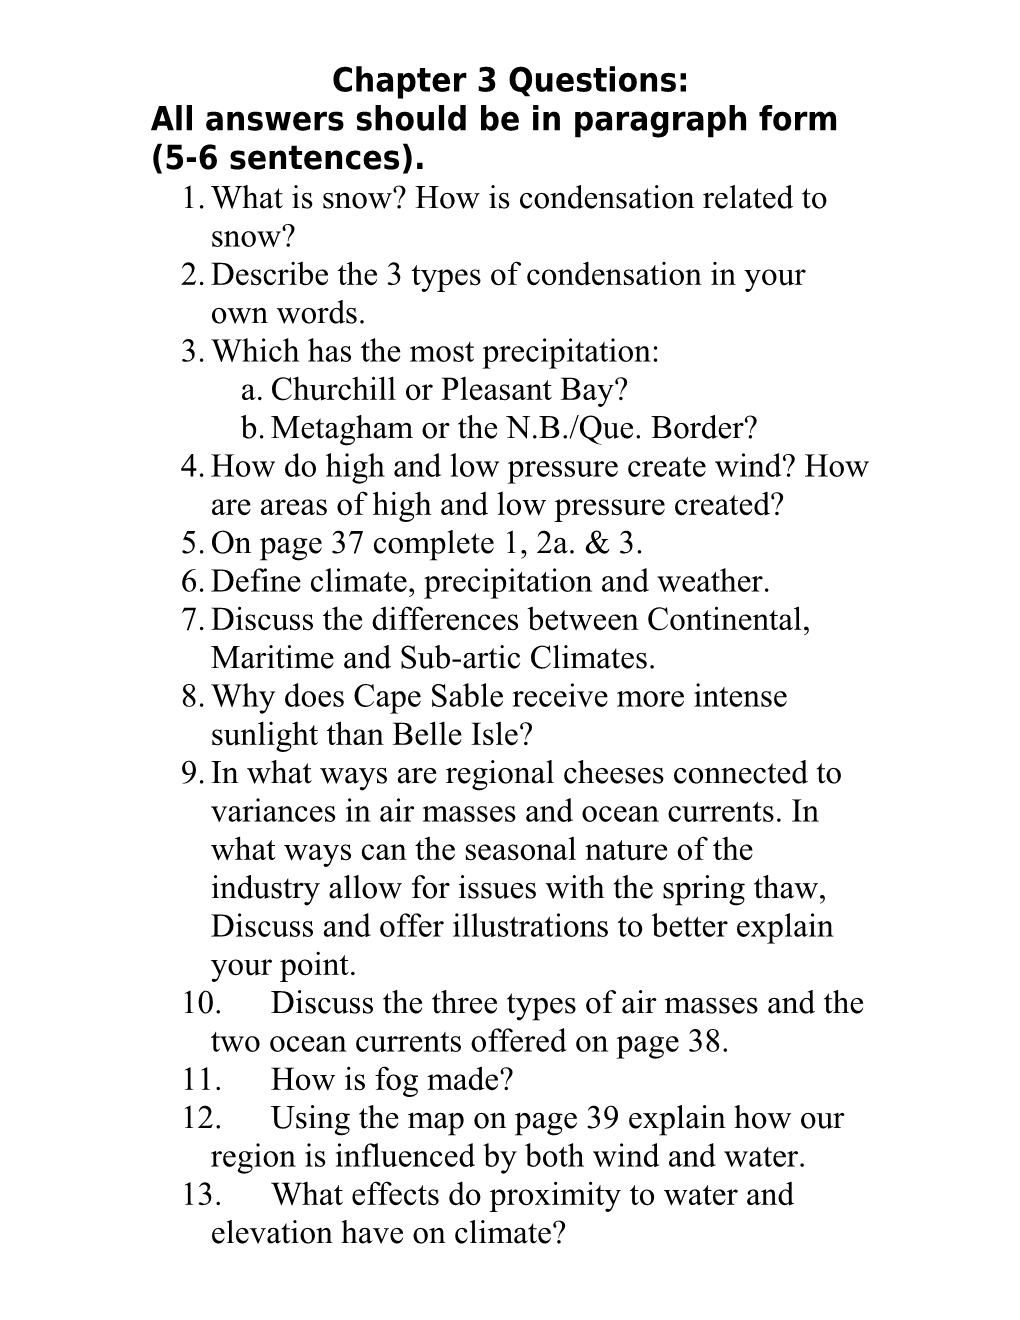 All Answers Should Be in Paragraph Form (5-6 Sentences)